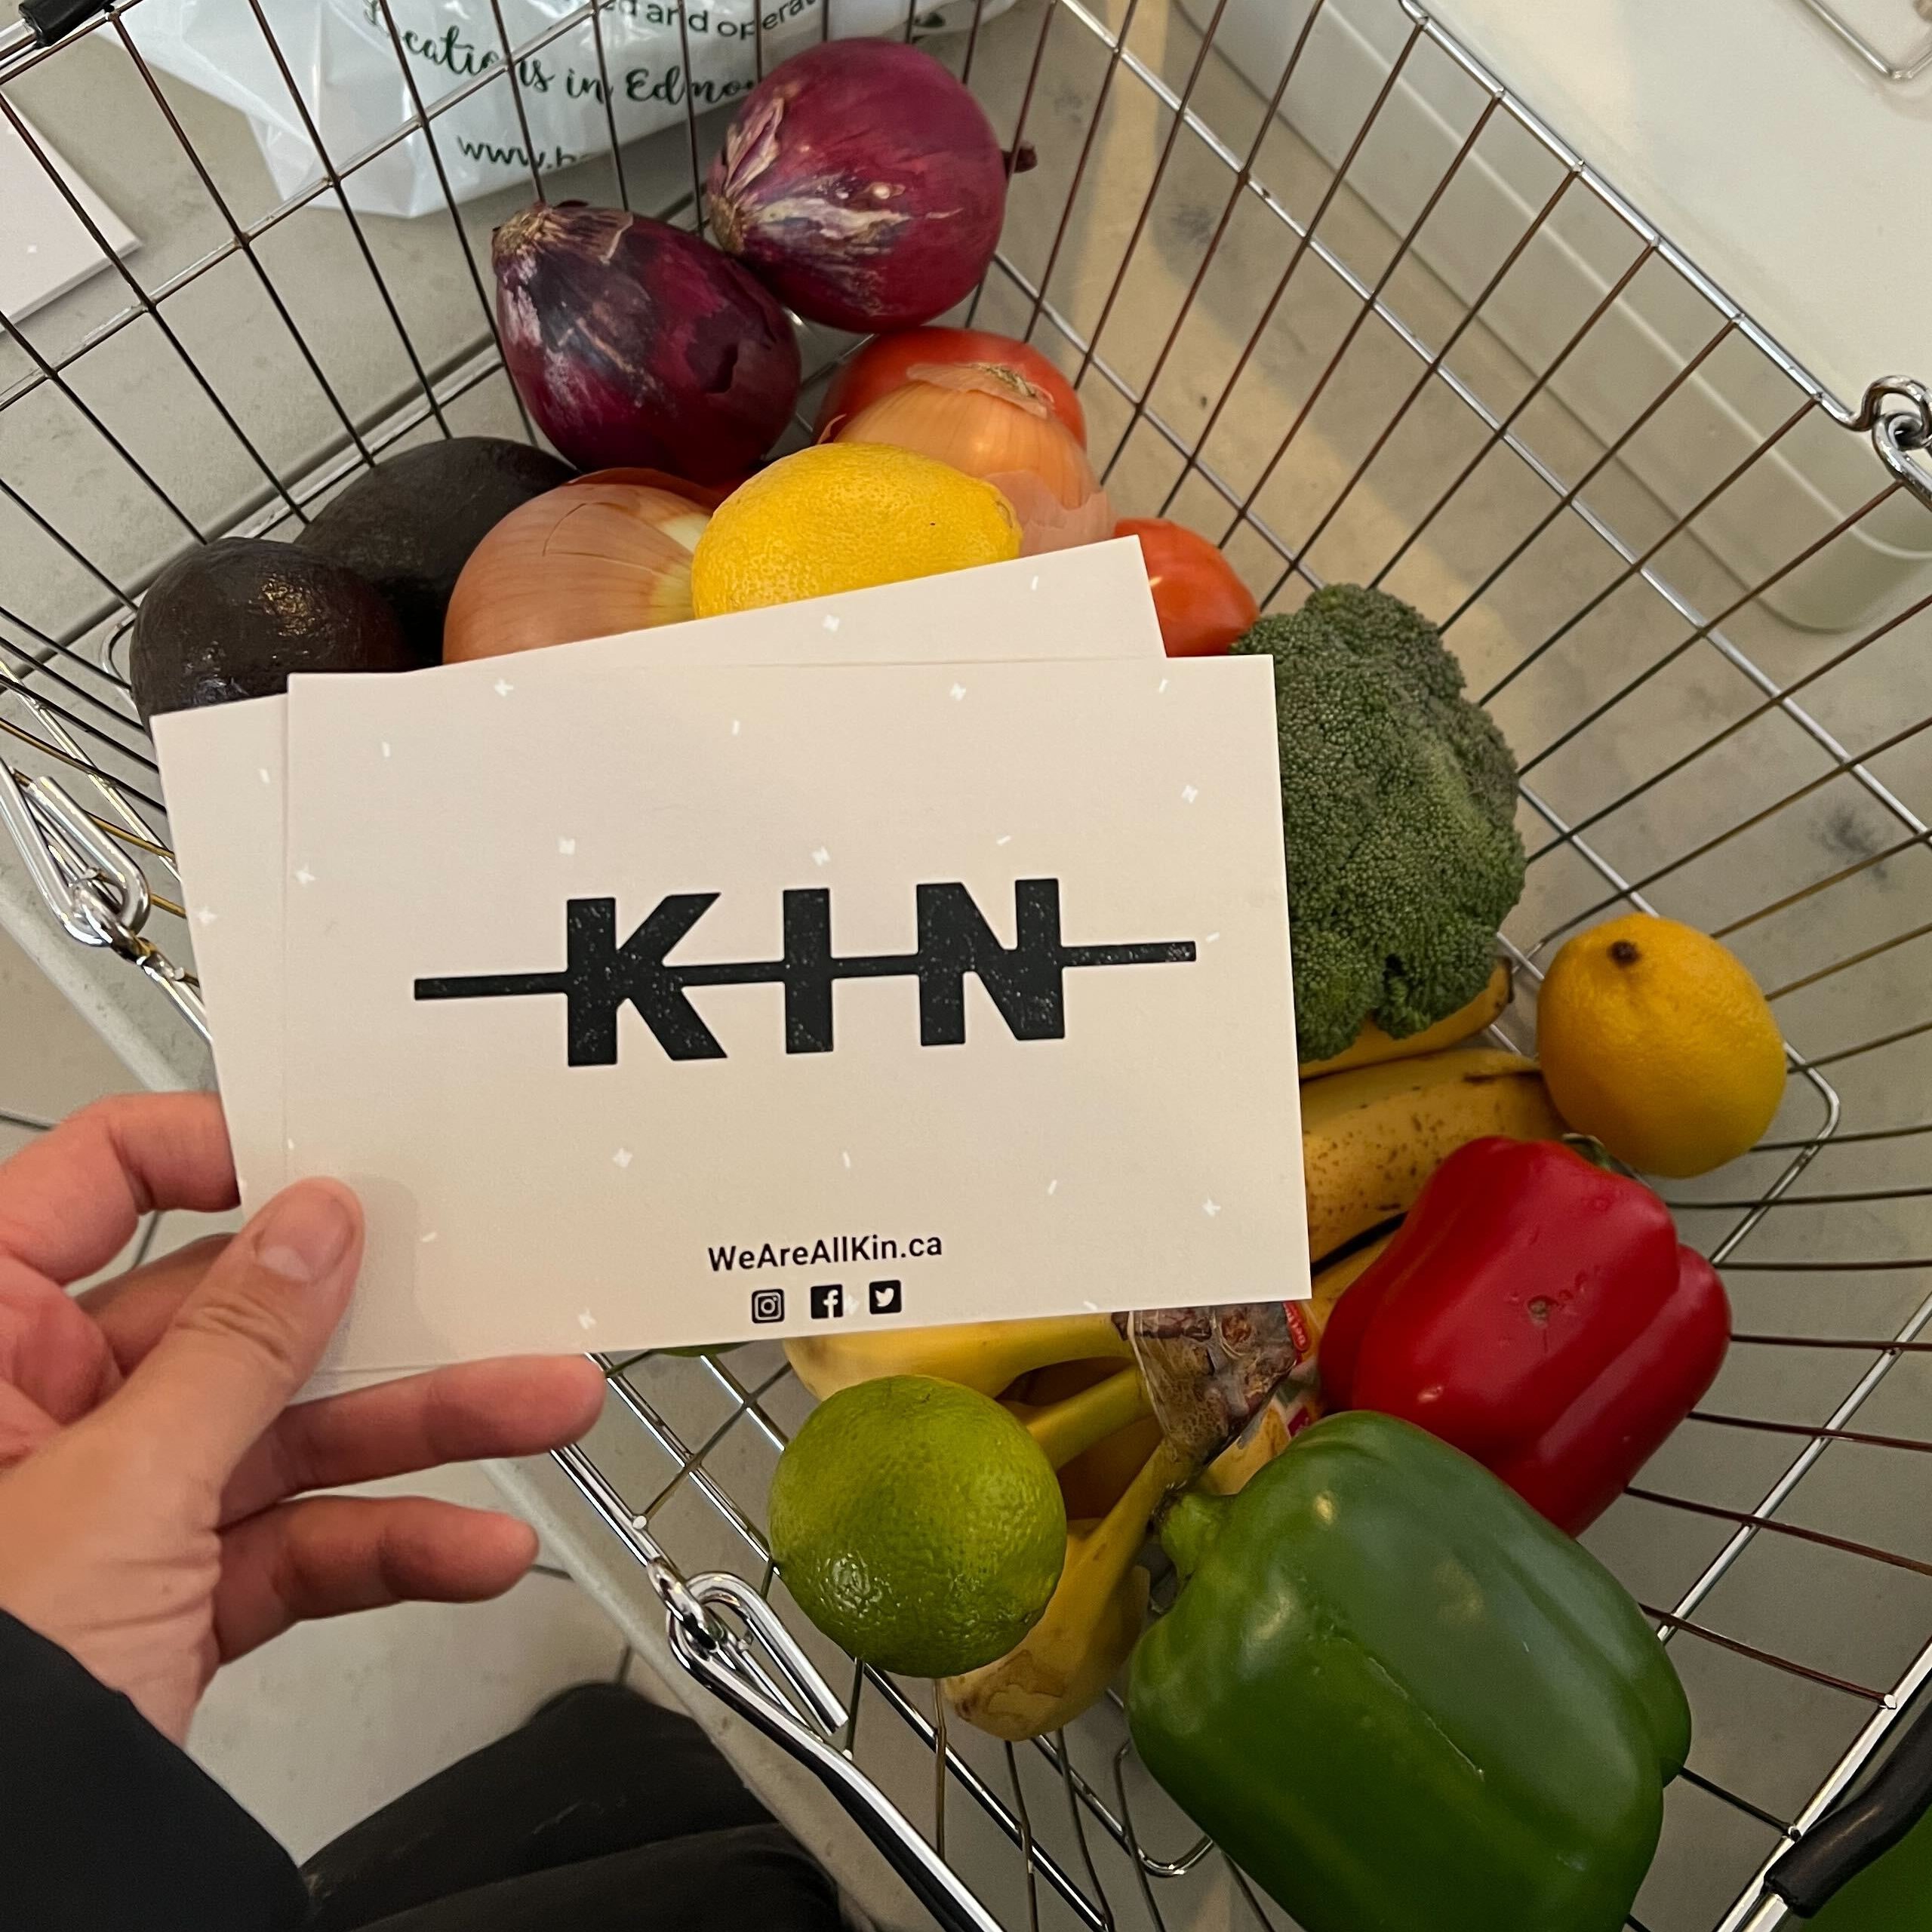 Kin on Twitter: "Everyone should have access to healthy food at a price that they can afford. Kin Market is stocked with high quality food, including locally-sourced food when possible. Whether you